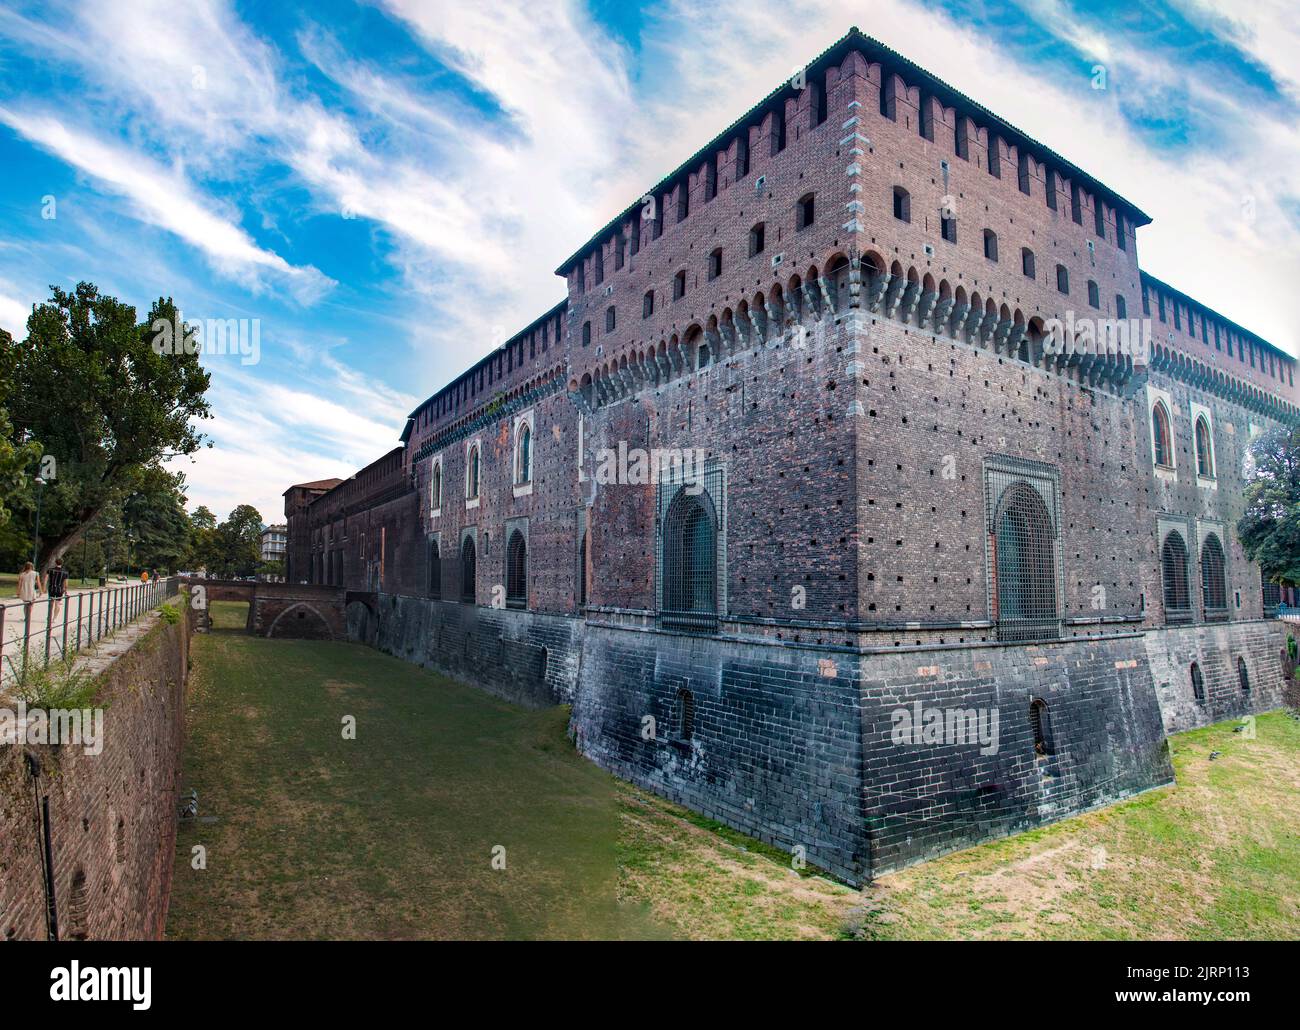 The Castello Sforzesco (Sforzesco Castle) is a medieval fortification located in Milan, Lombardy, northern Italy Stock Photo